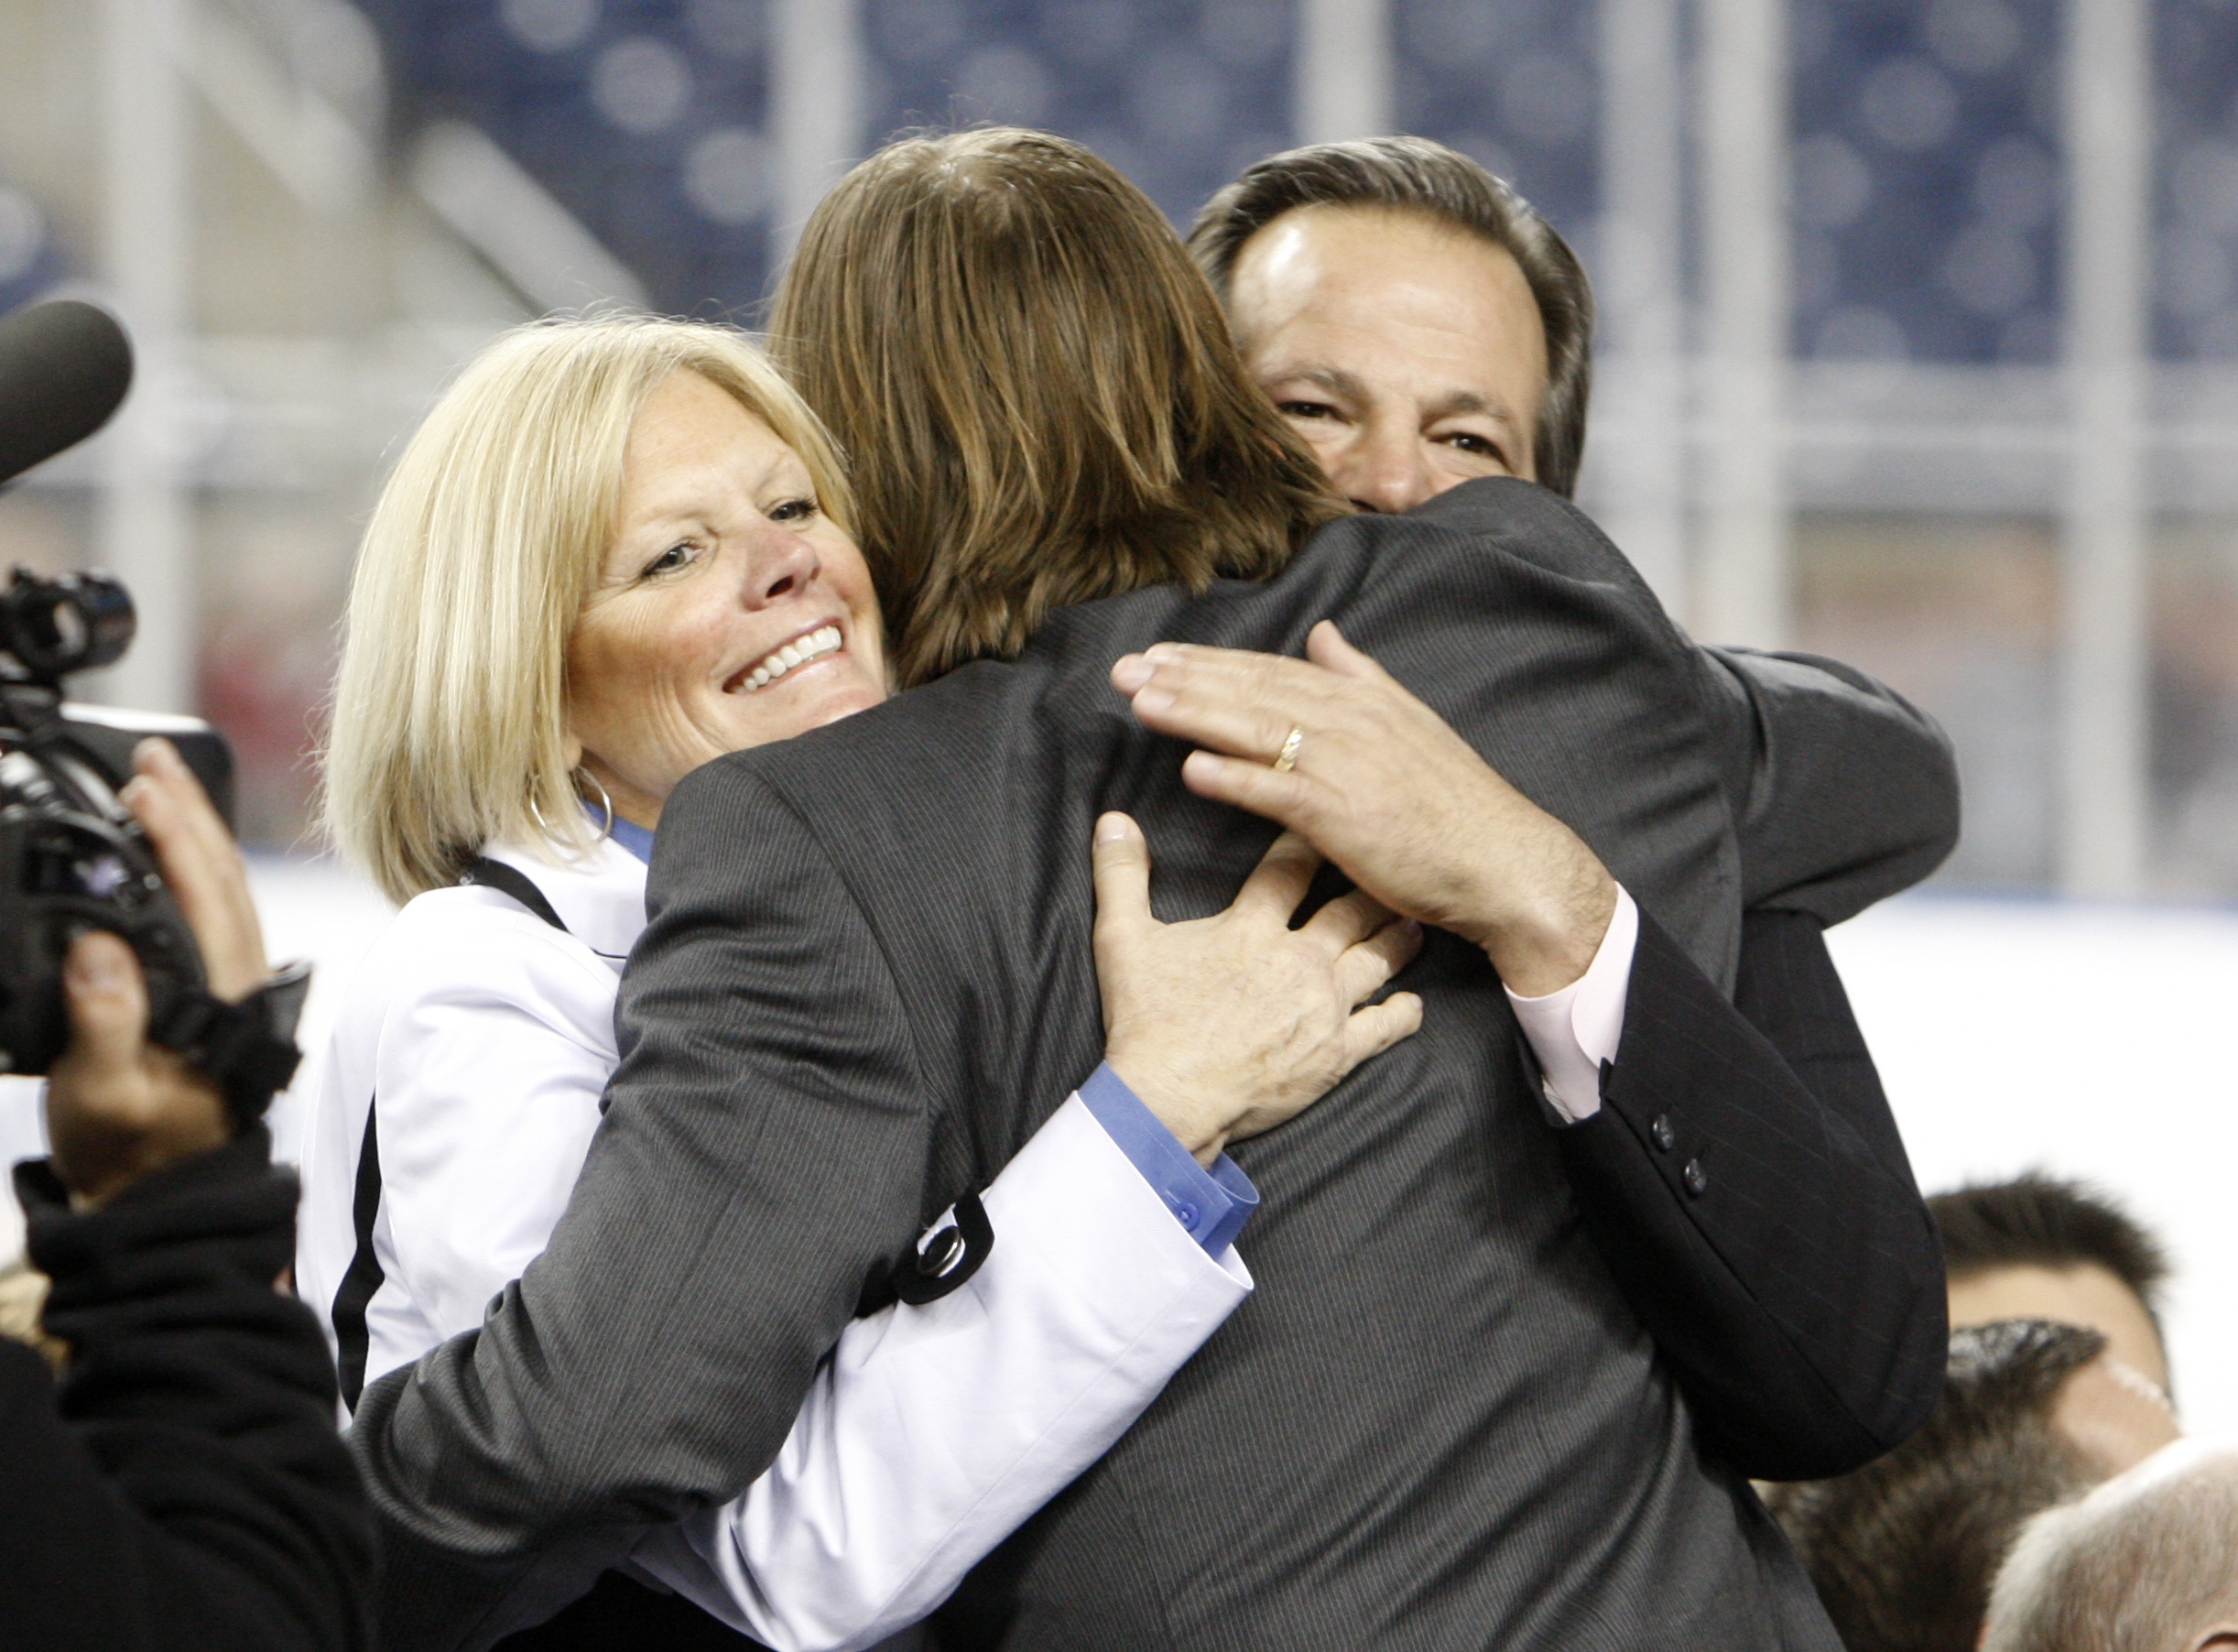 Blake Geoffrion hugs his parents Danny and Kelly after Blake received an award